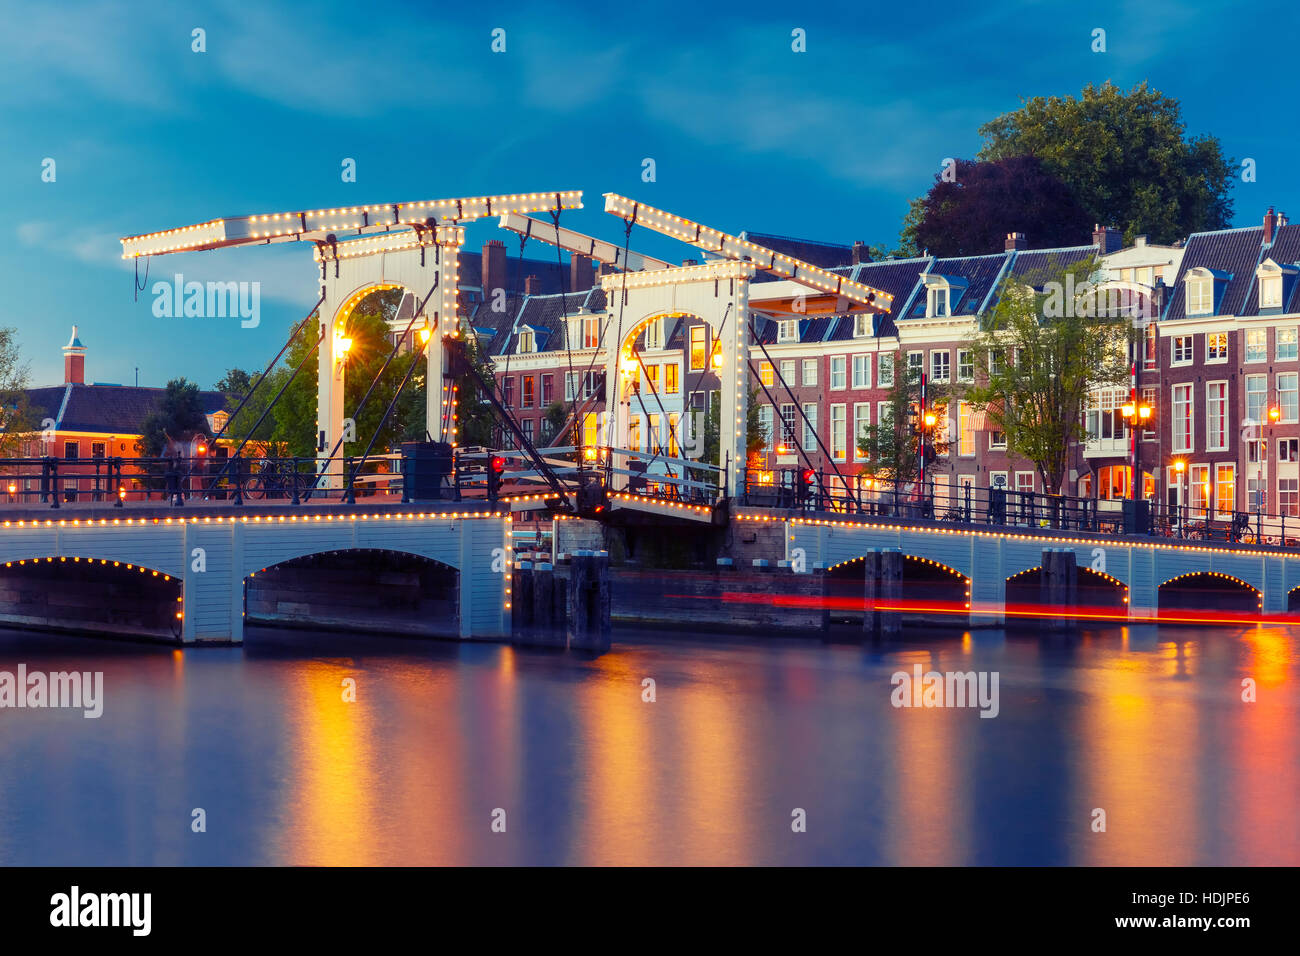 Pont Magere Brug, maigres, Amsterdam, Pays-Bas Banque D'Images